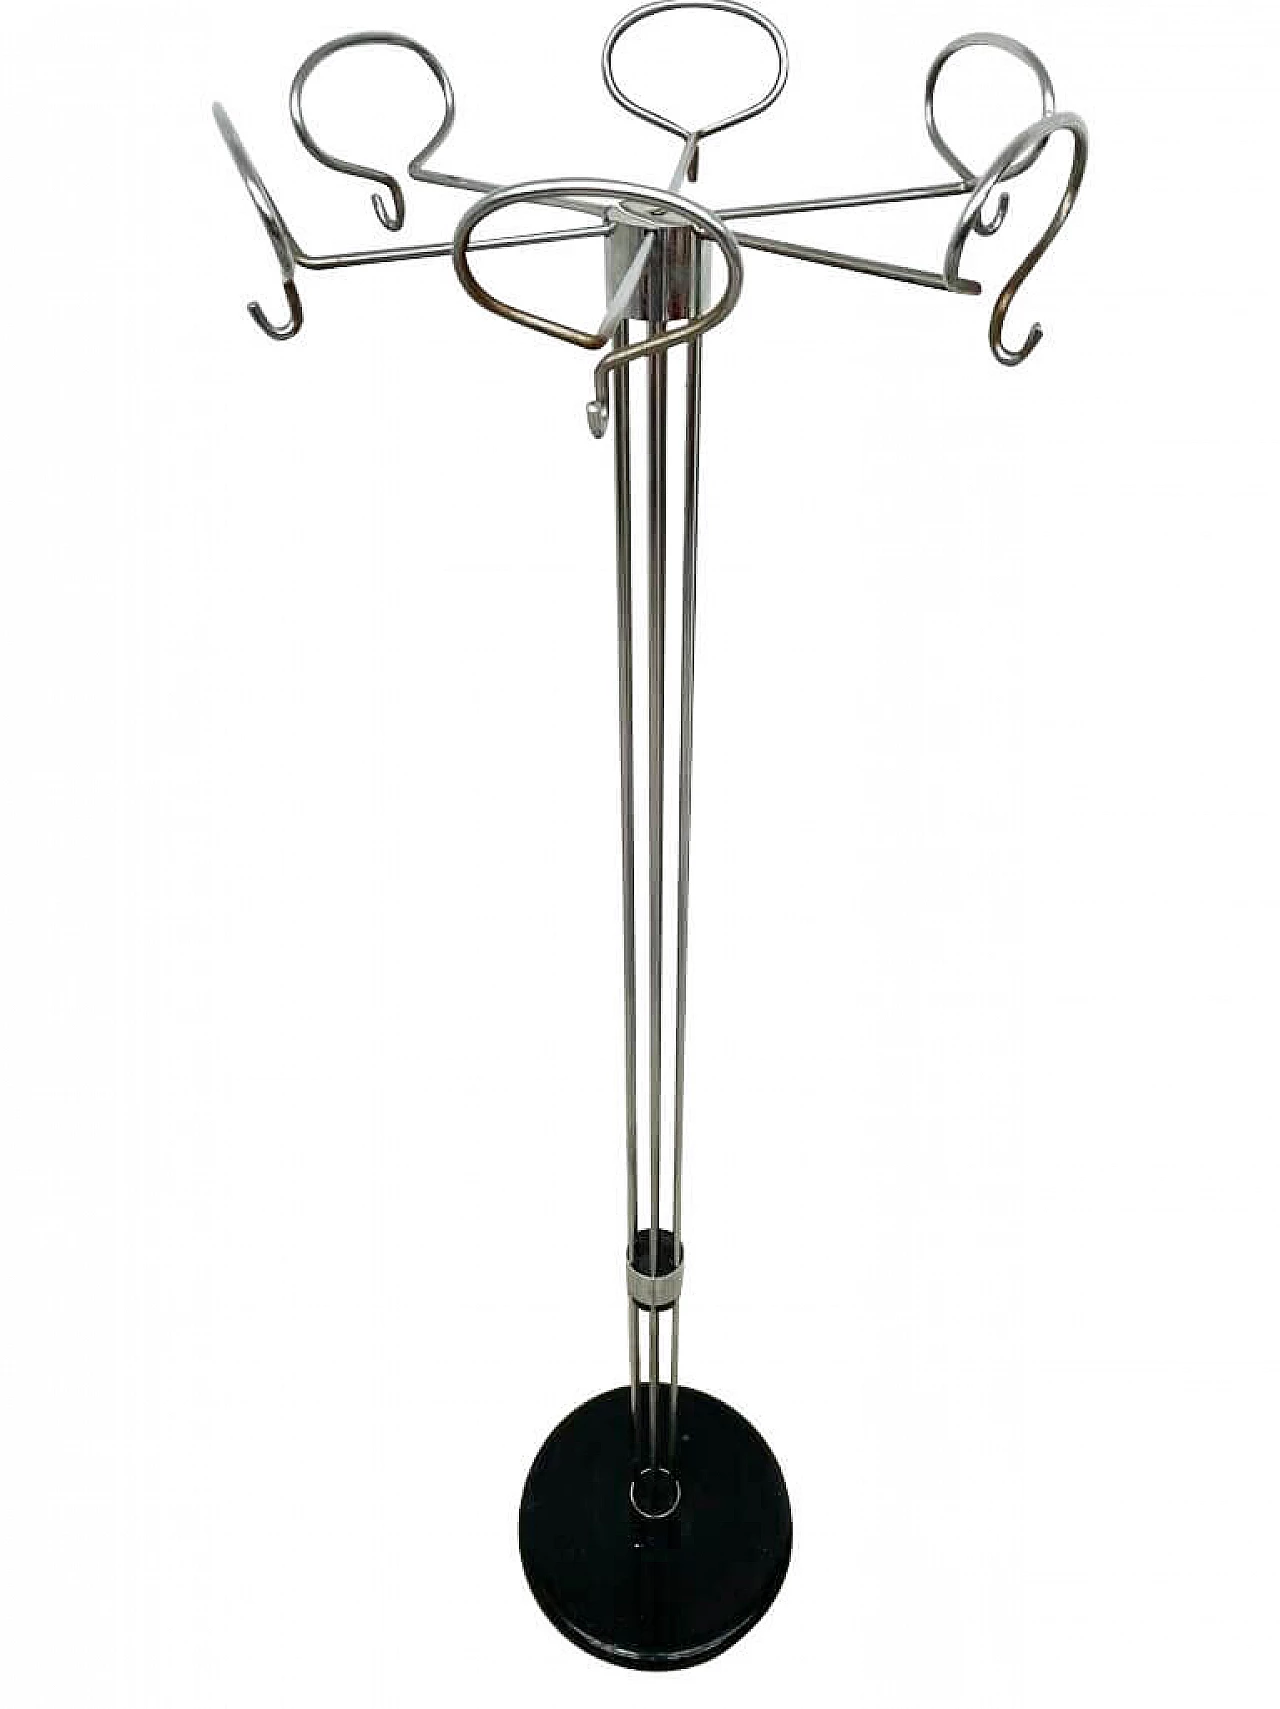 Chromed coat stand by Isao Hosoe for Valenti Luce, 70s 1280547